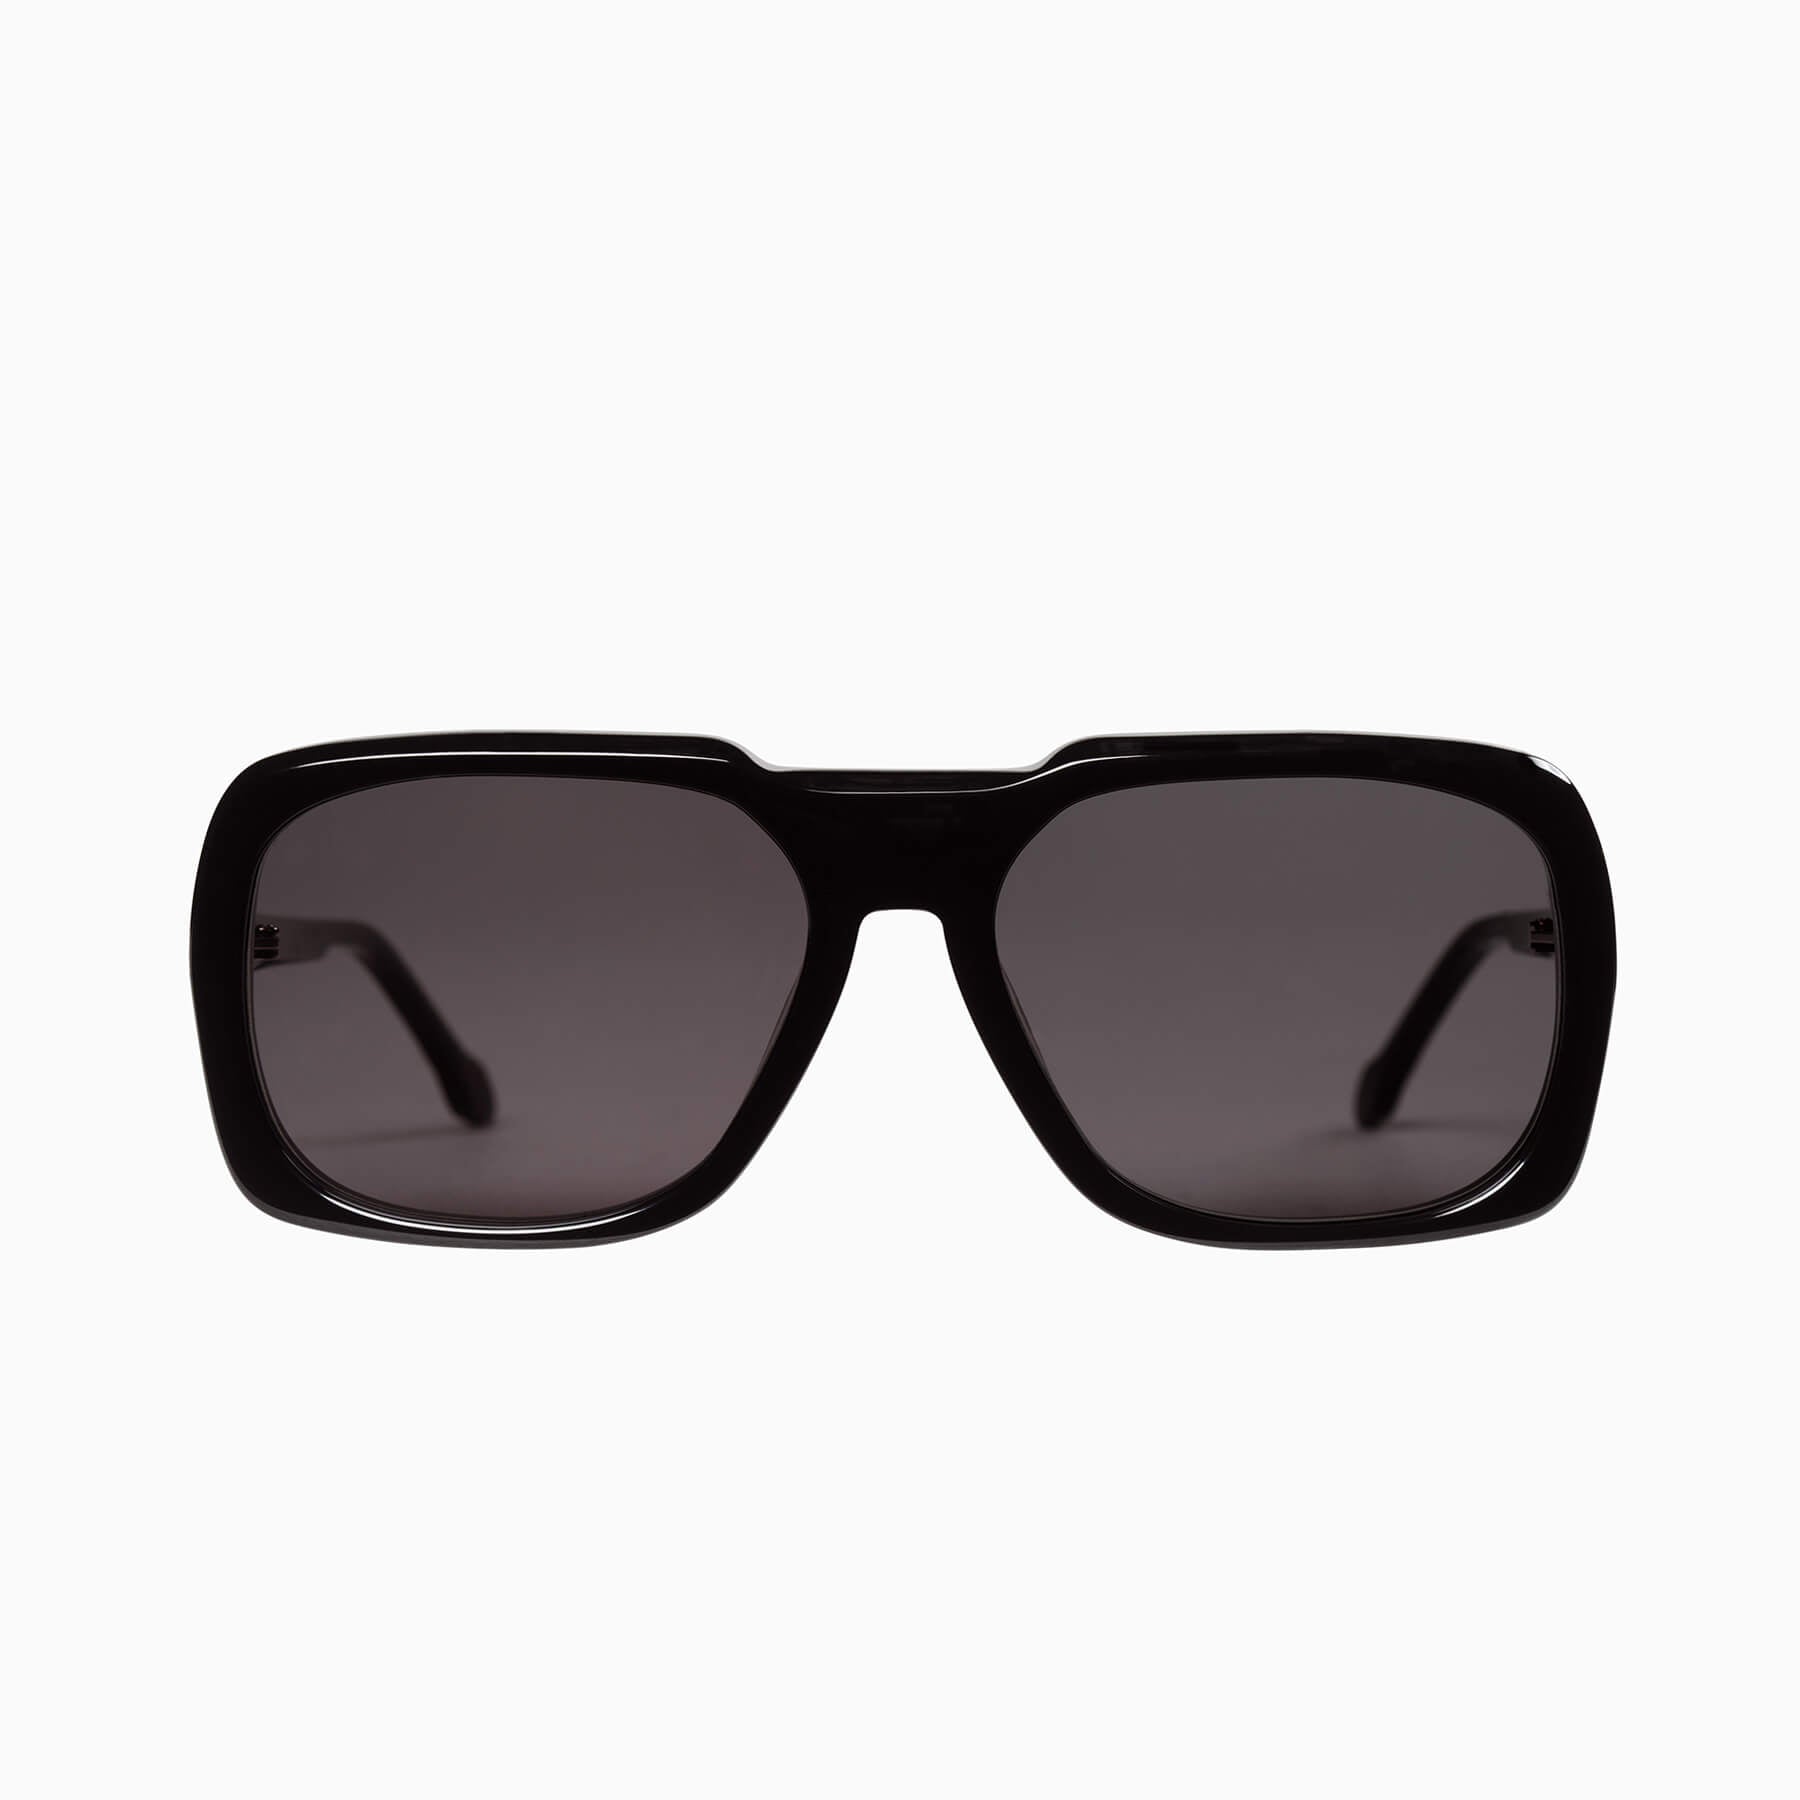 Chanel sunglasses with a square frame in black and dark green, with  transparent black lenses